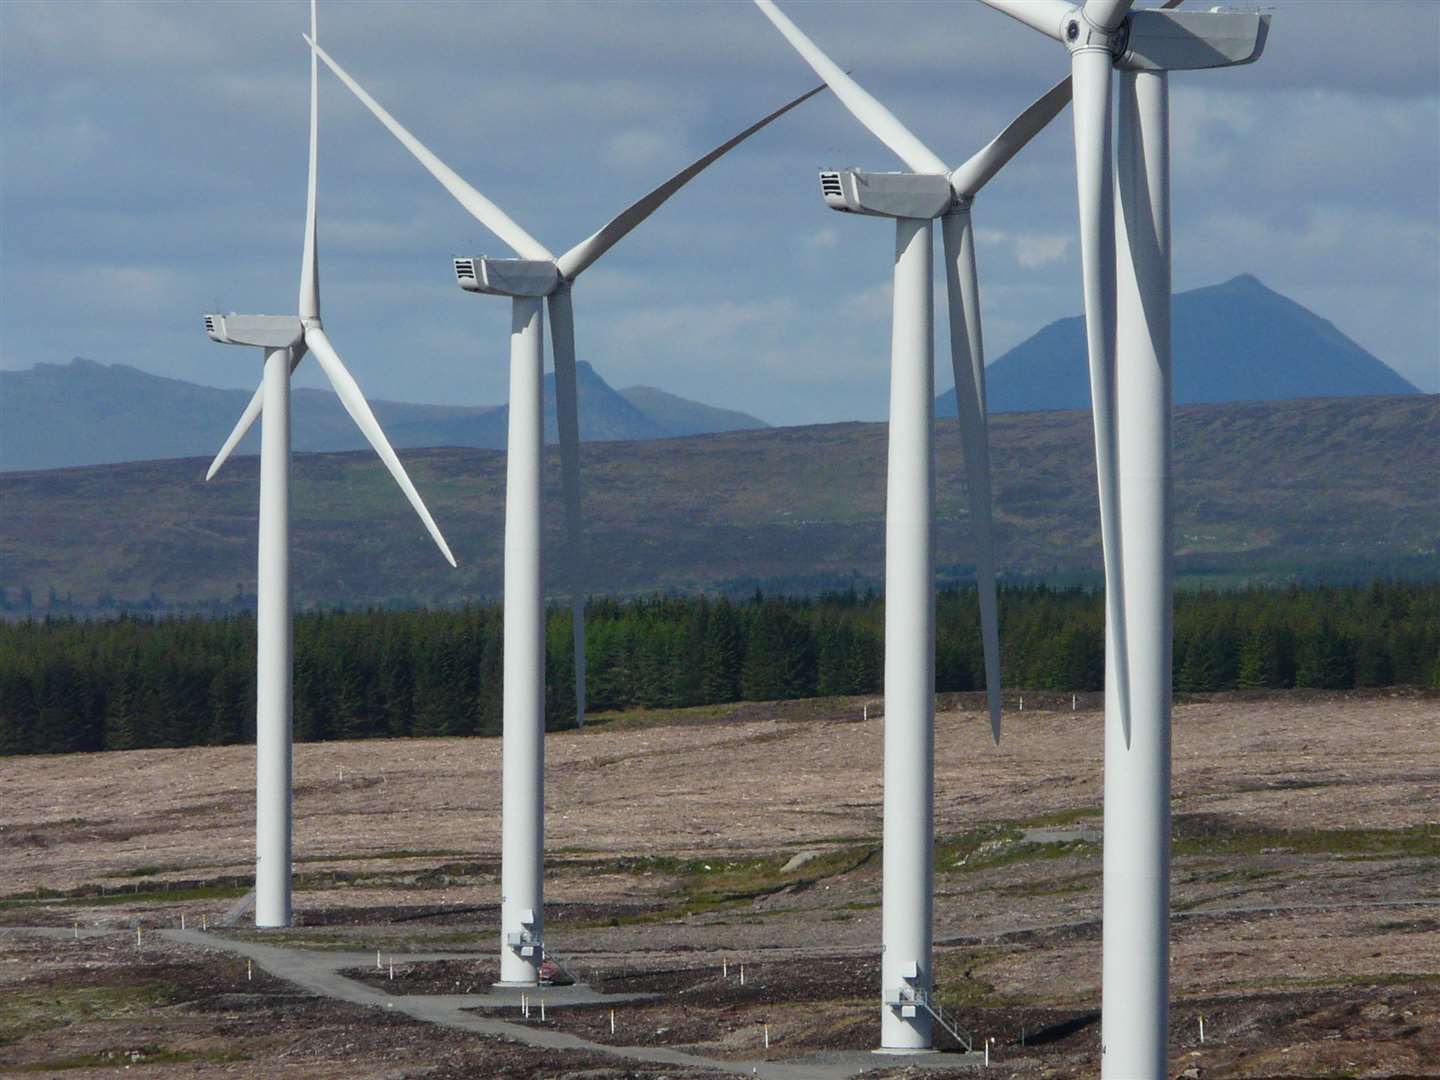 Scottish generators, including onshore wind farms, pay a higher cost for use of the transmission network compared with other parts of Britain. Picture: Alan Hendry